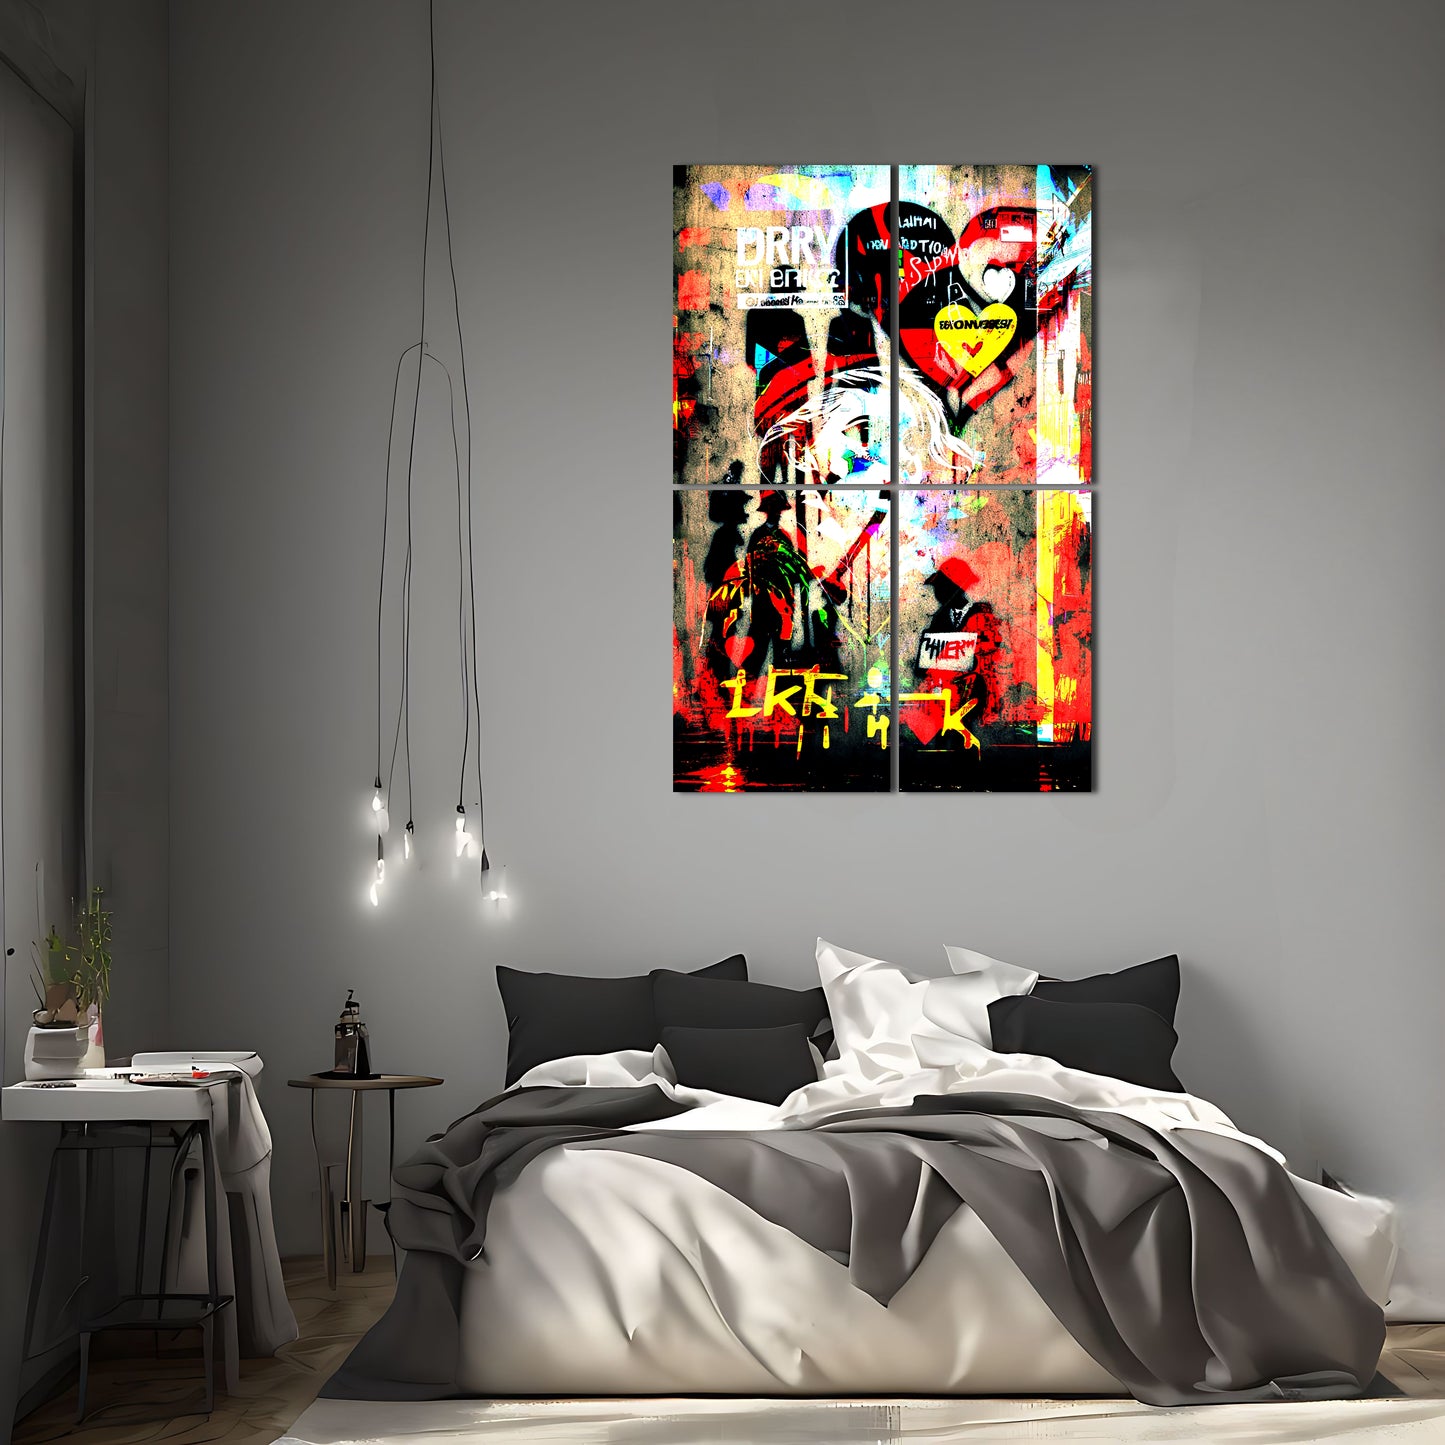 Colorful Pop Art Painting of a Clown with Heart by Dirk Helmbreker